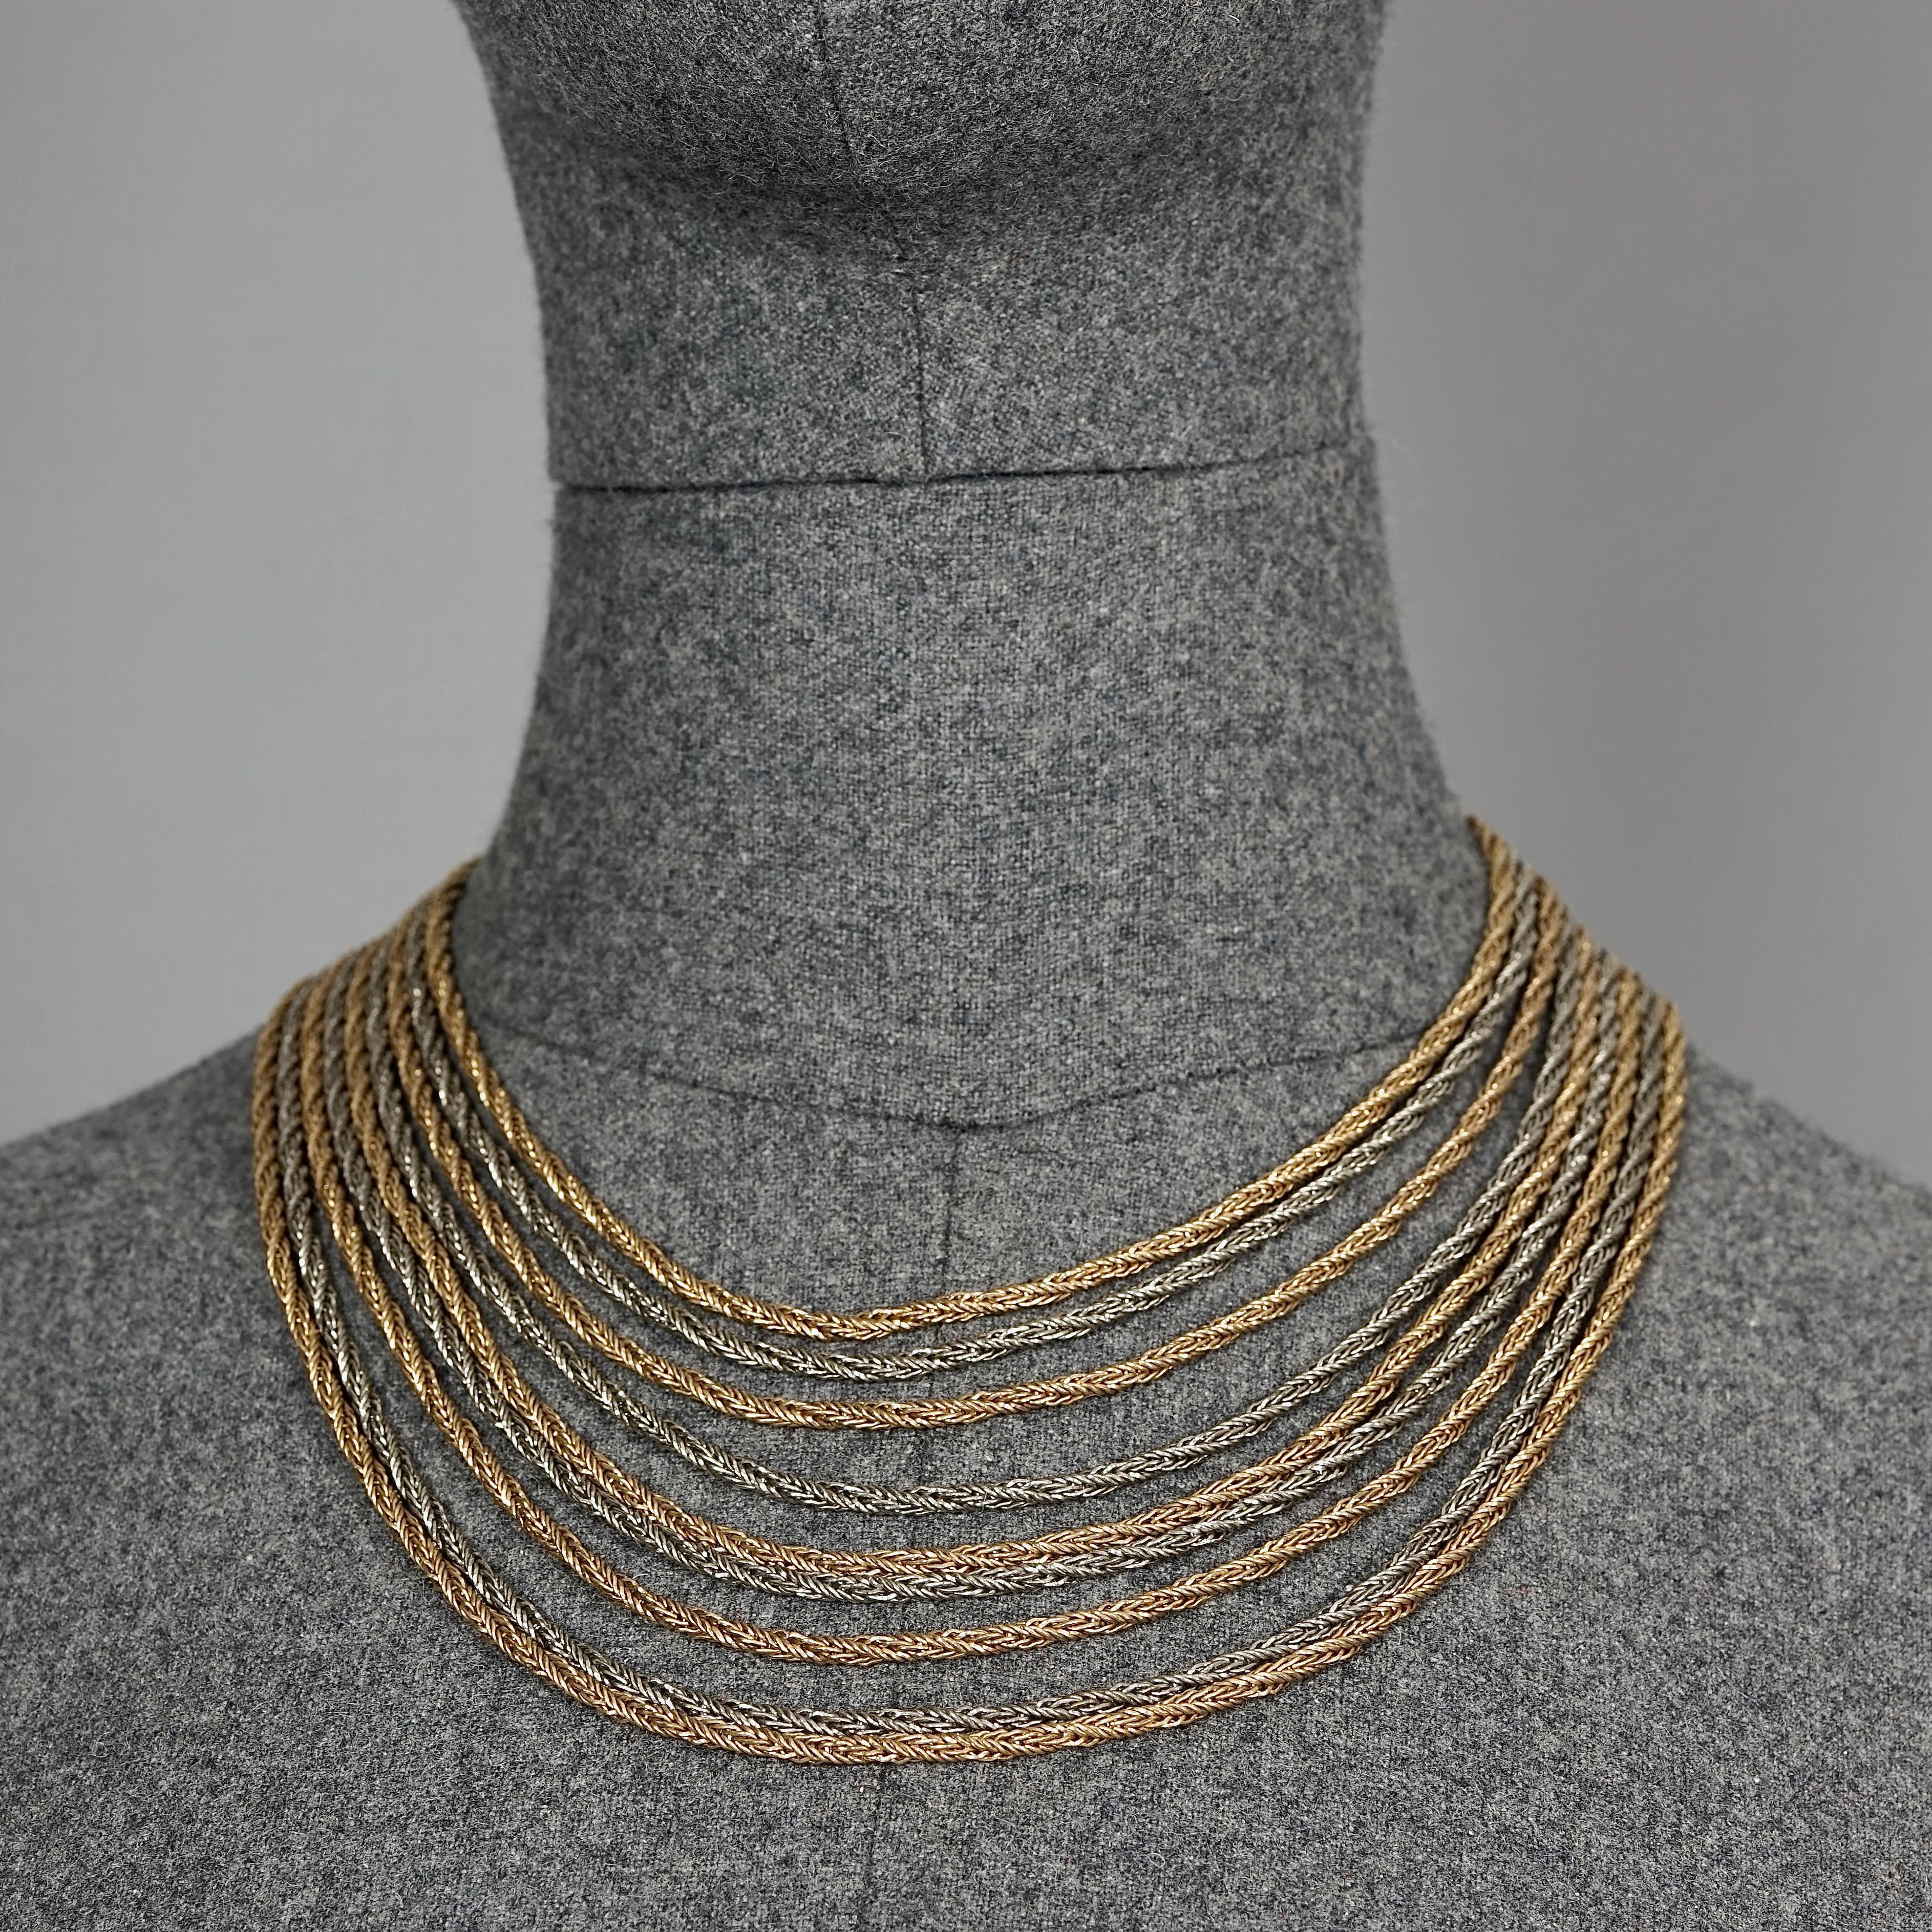 Vintage 1964 CHRISTIAN DIOR 9 Strand Two Tone Chain Necklace

Measurements:
Height: 3.54 inches (9 cm) when worn
Wearable Length: 16.14 inches (41 cm)

Features:
- 100% Authentic CHRISTIAN DIOR.
- 9 strand two tone chain necklace.
- Gold and silver